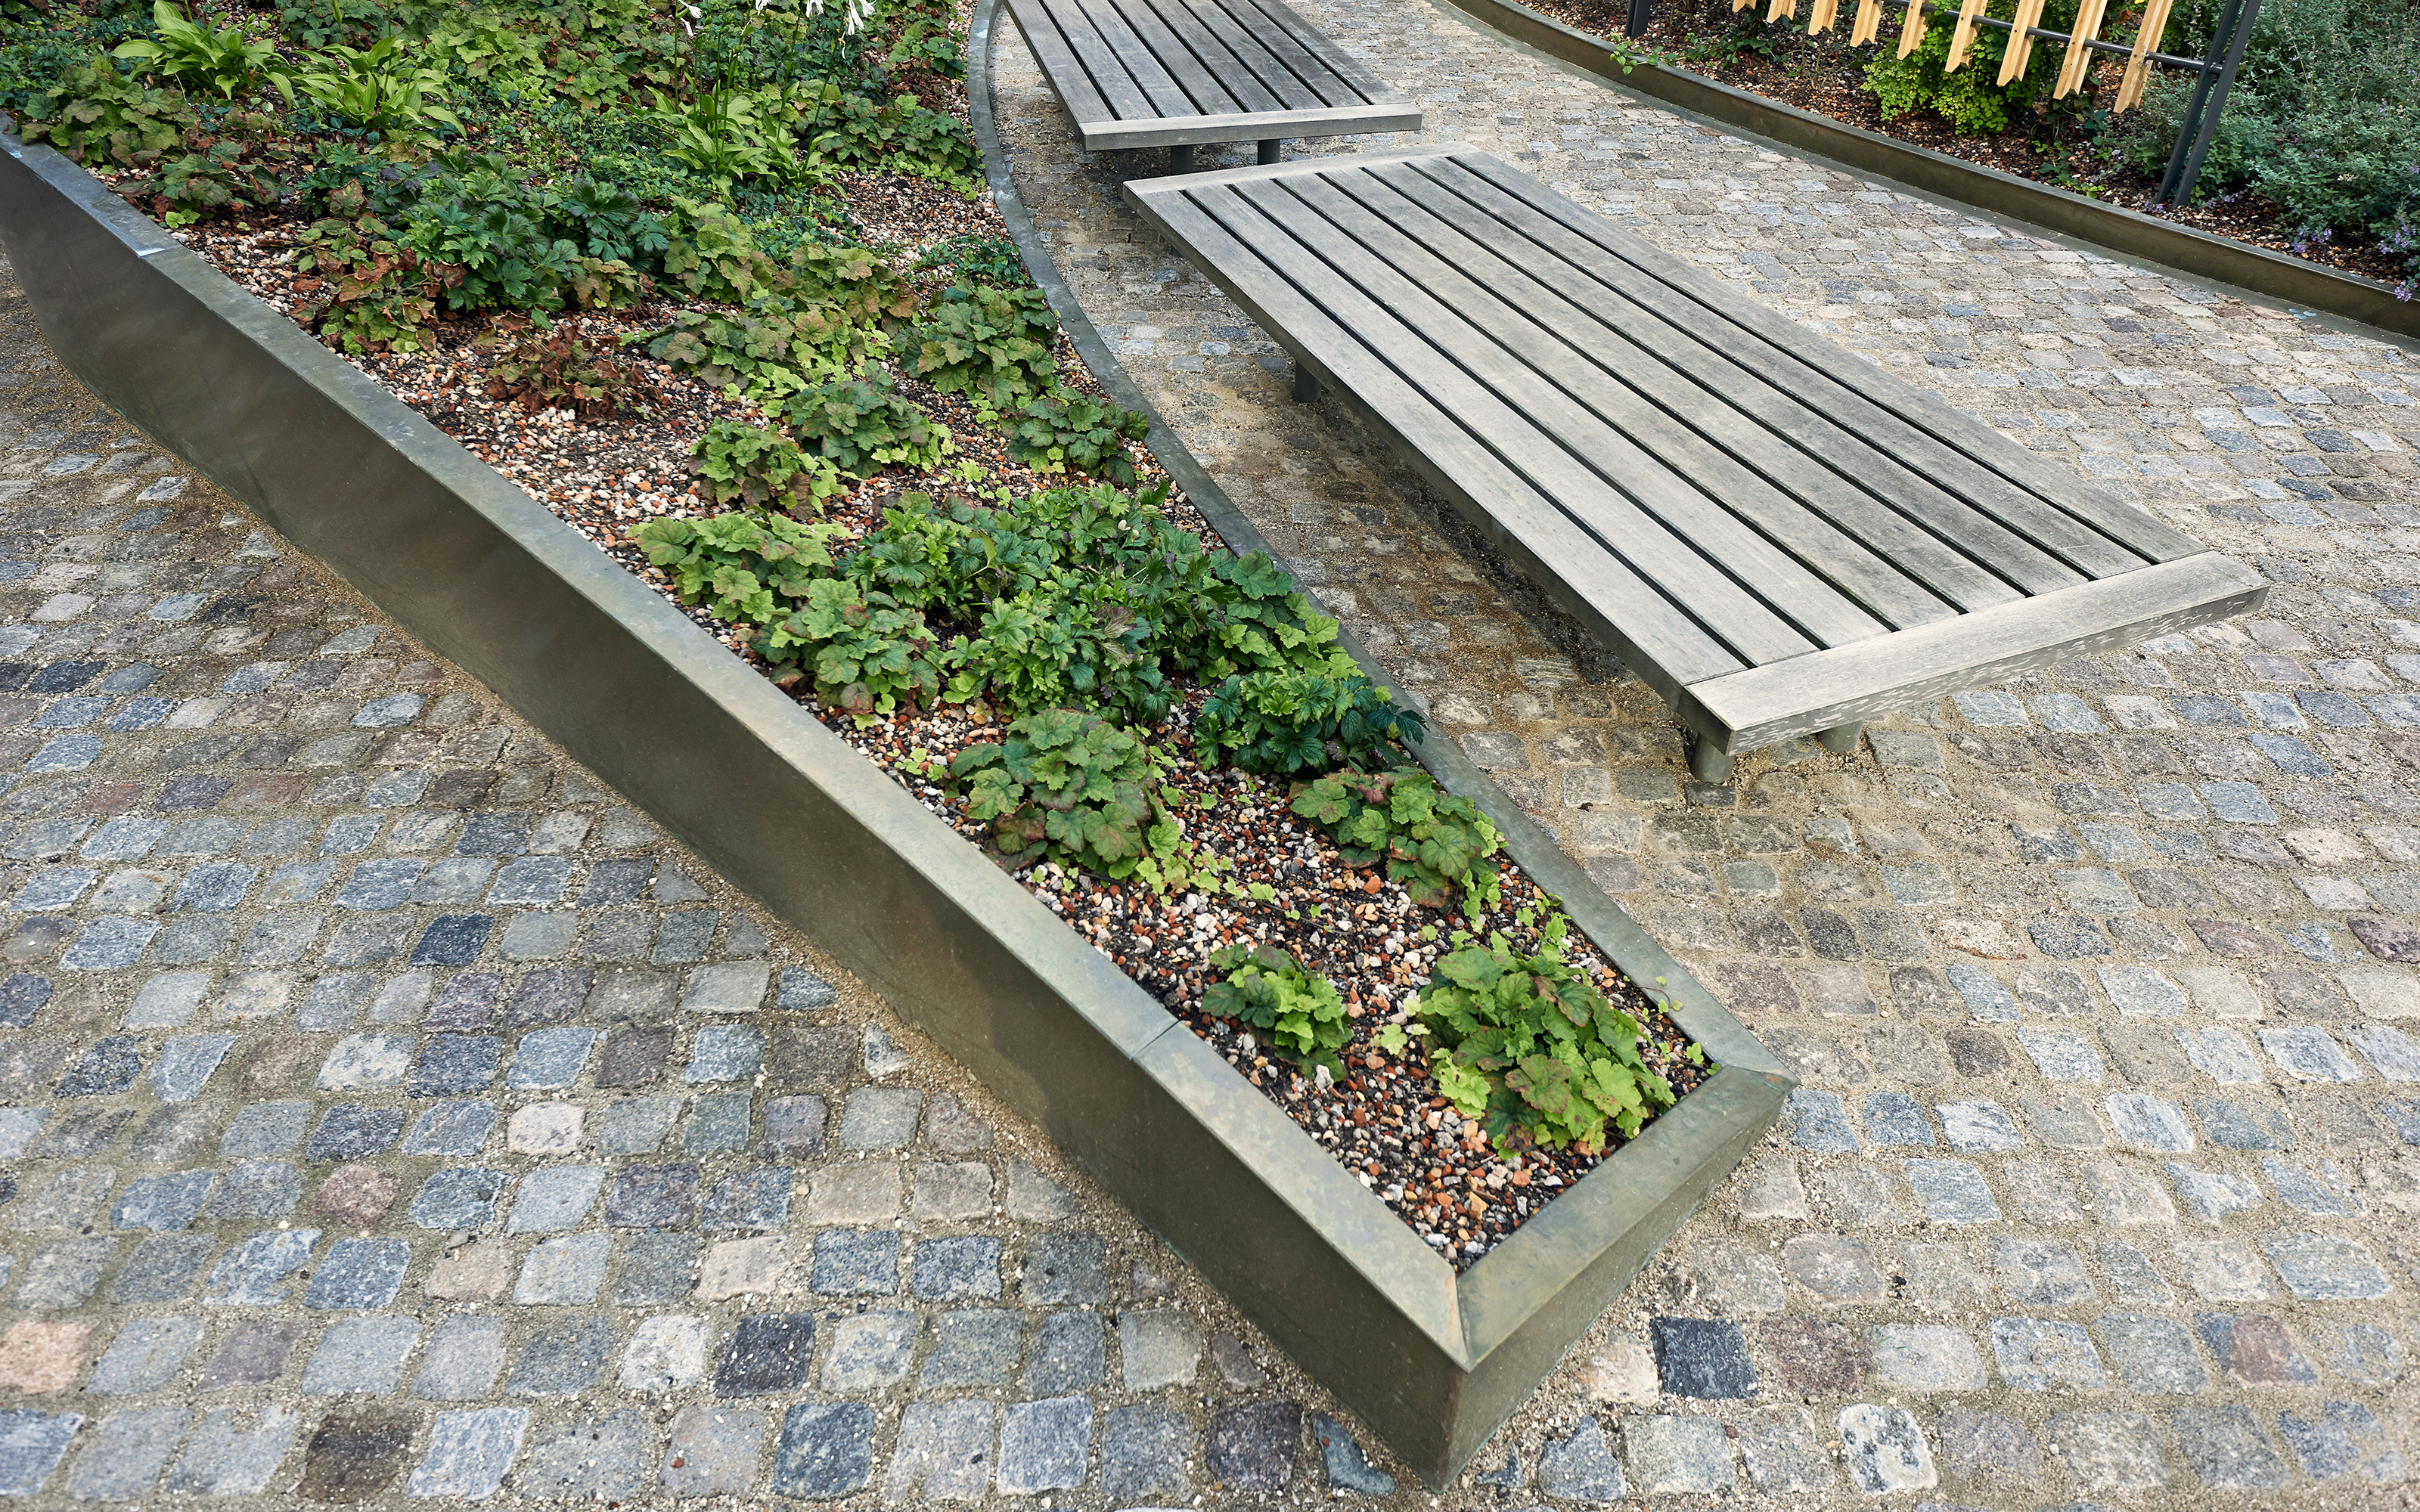 Bench and plant bed